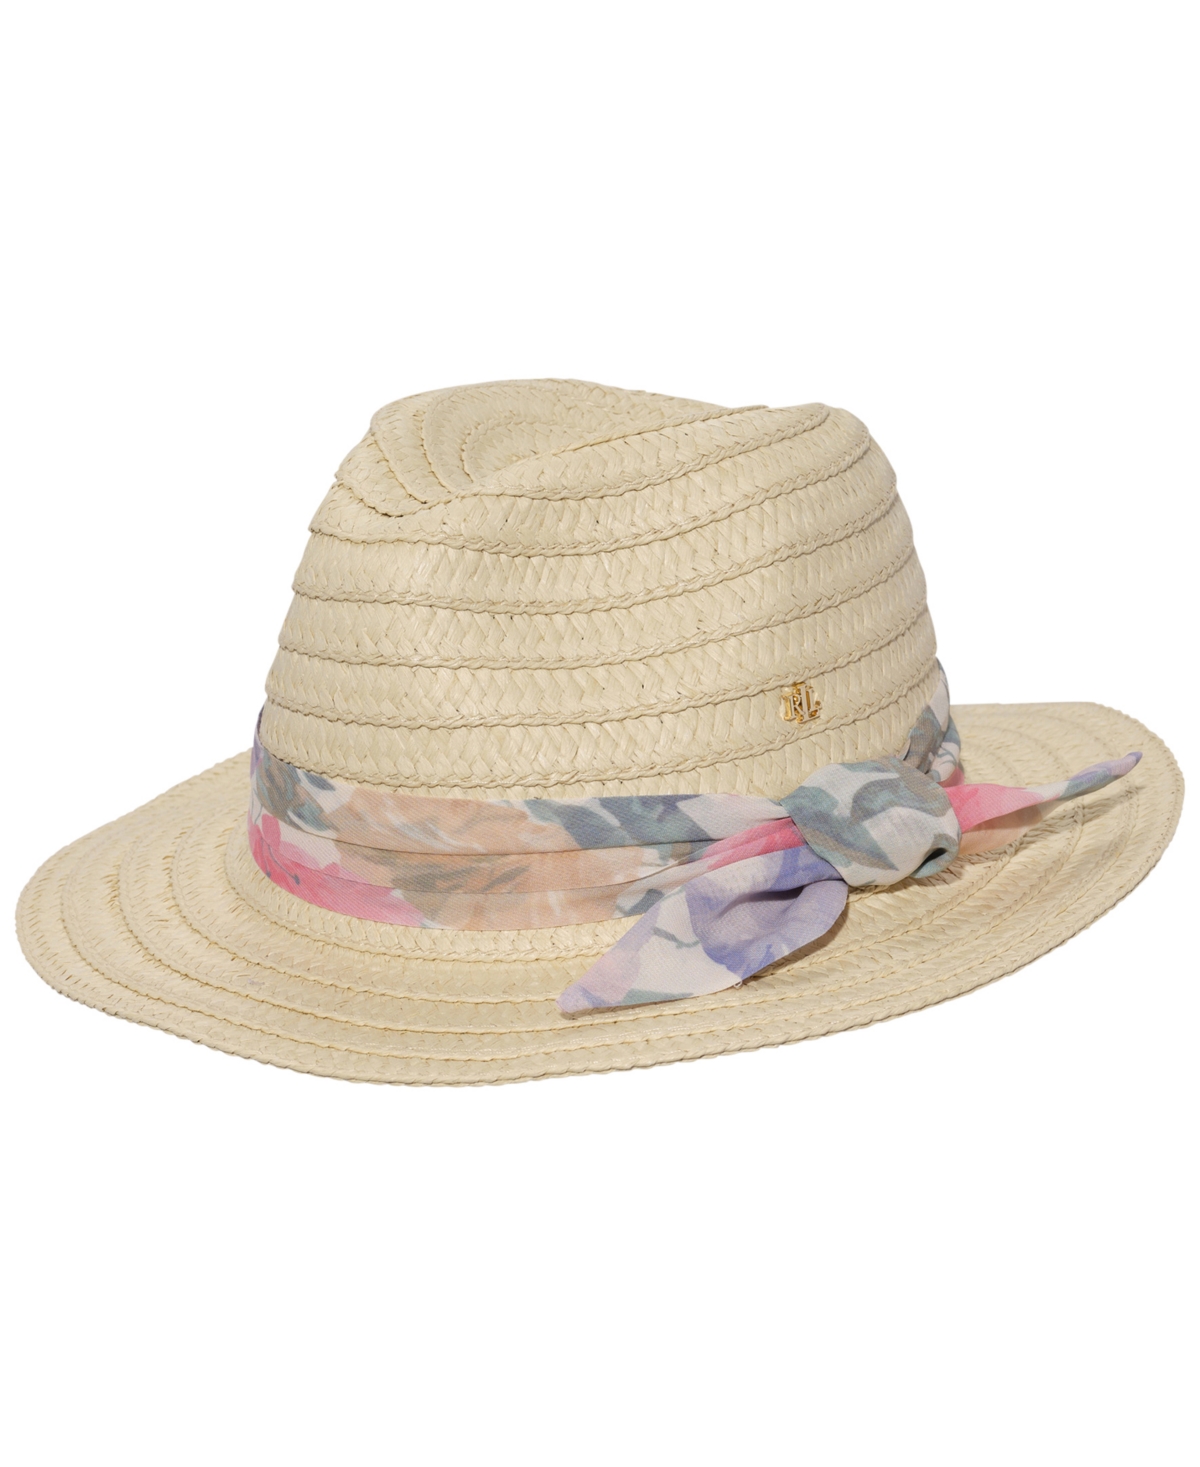 Fedora with Floral Band with Knot Hat - Natural Multi